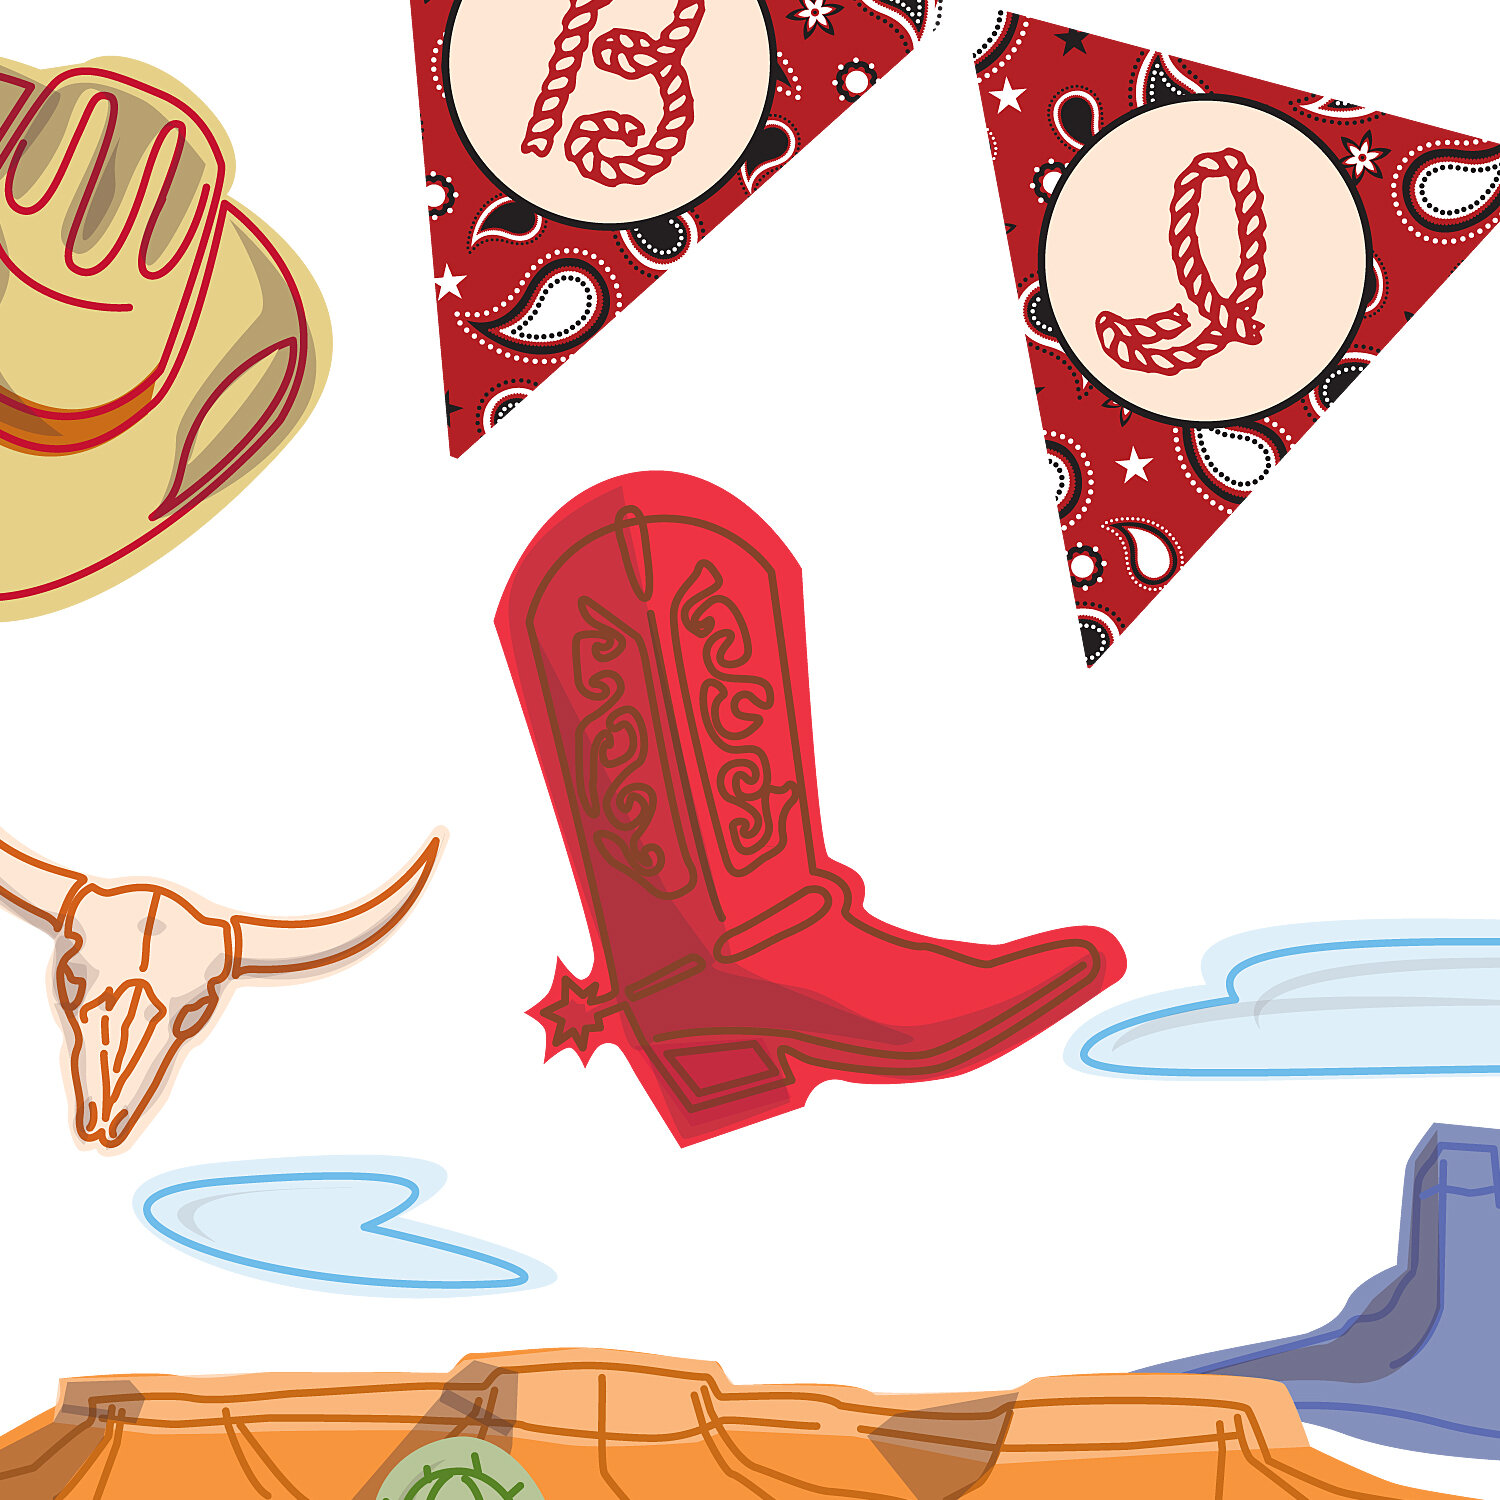  Happy B-day Western, detail - Wall Decals 